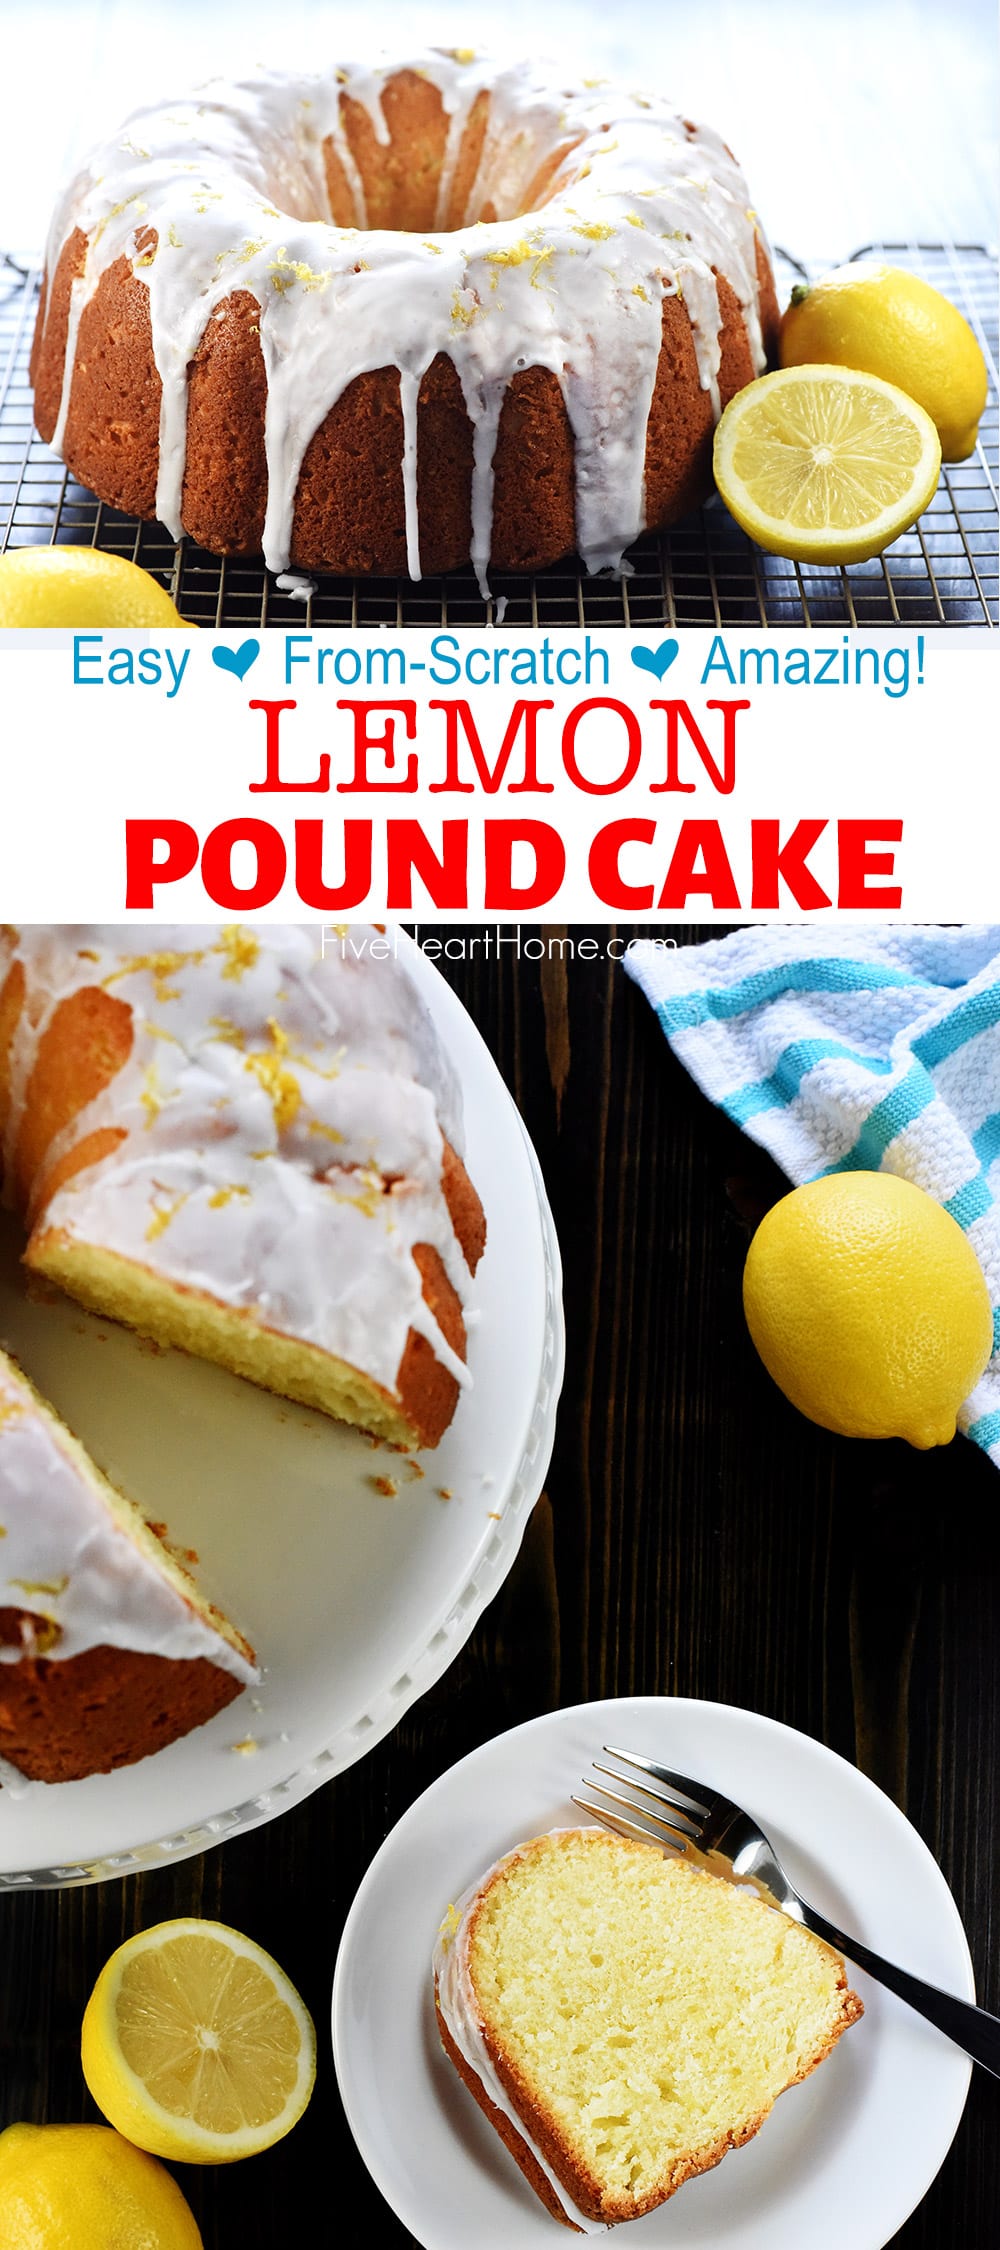 Lemon Pound Cake ~ soft and moist with a golden exterior and a tangy lemon glaze...an easy, scrumptious dessert recipe for Easter, spring, or summer! | FiveHeartHome.com via @fivehearthome